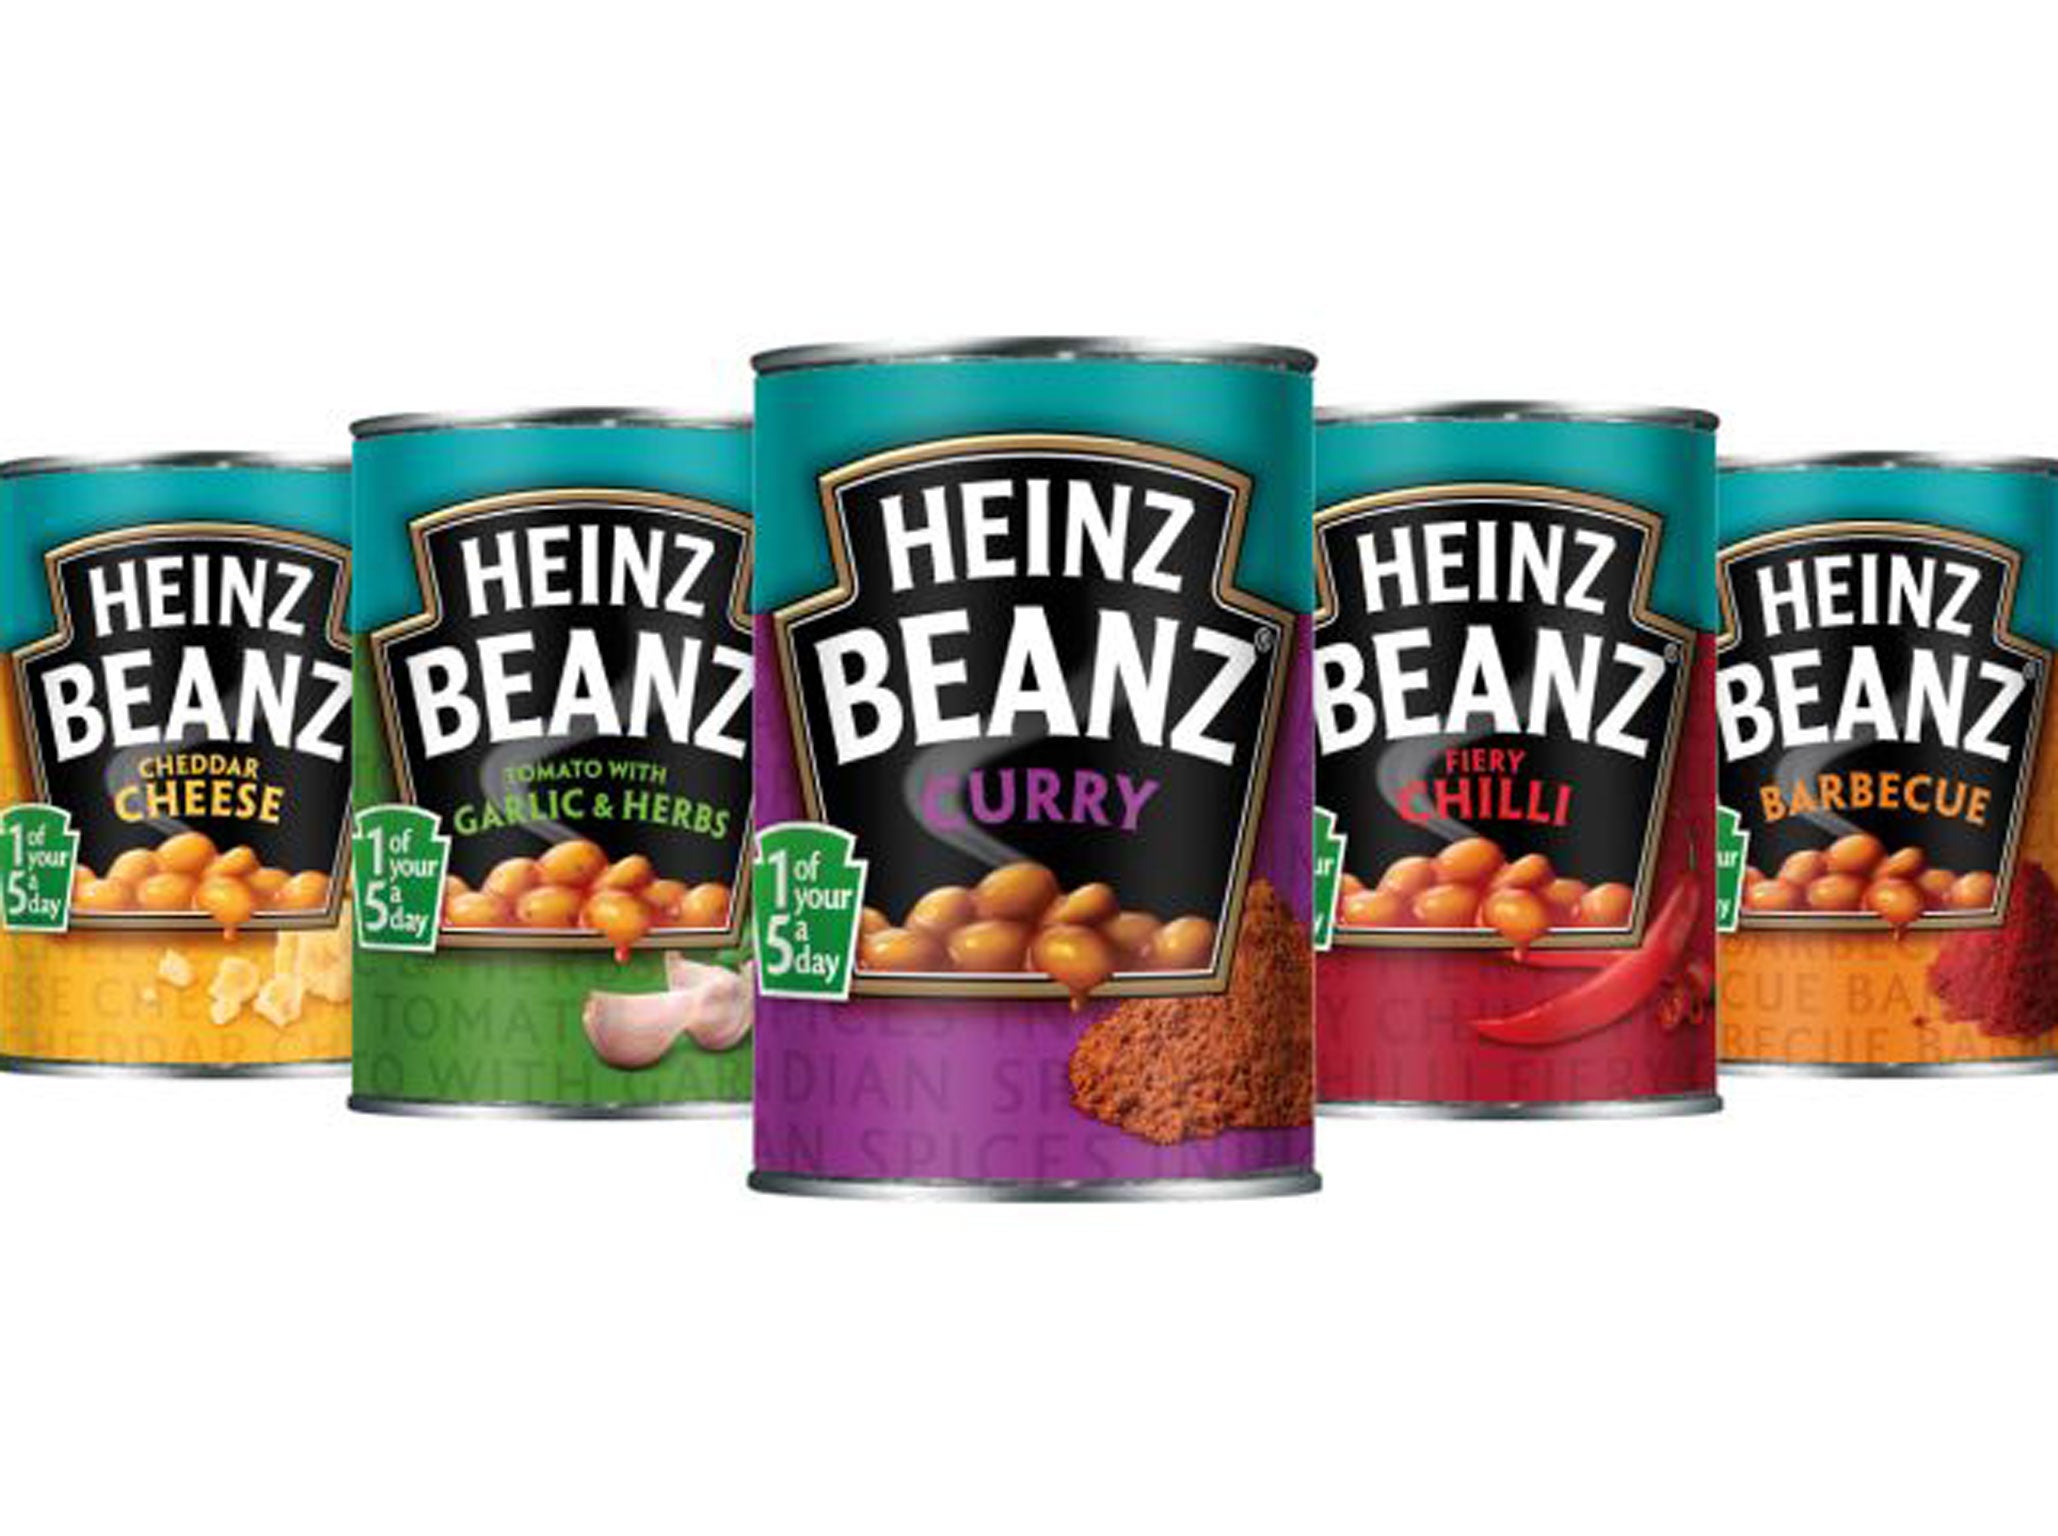 Canned Goods Heinz Meanz Beanz And Er Curry And Cheese The Independent The Independent